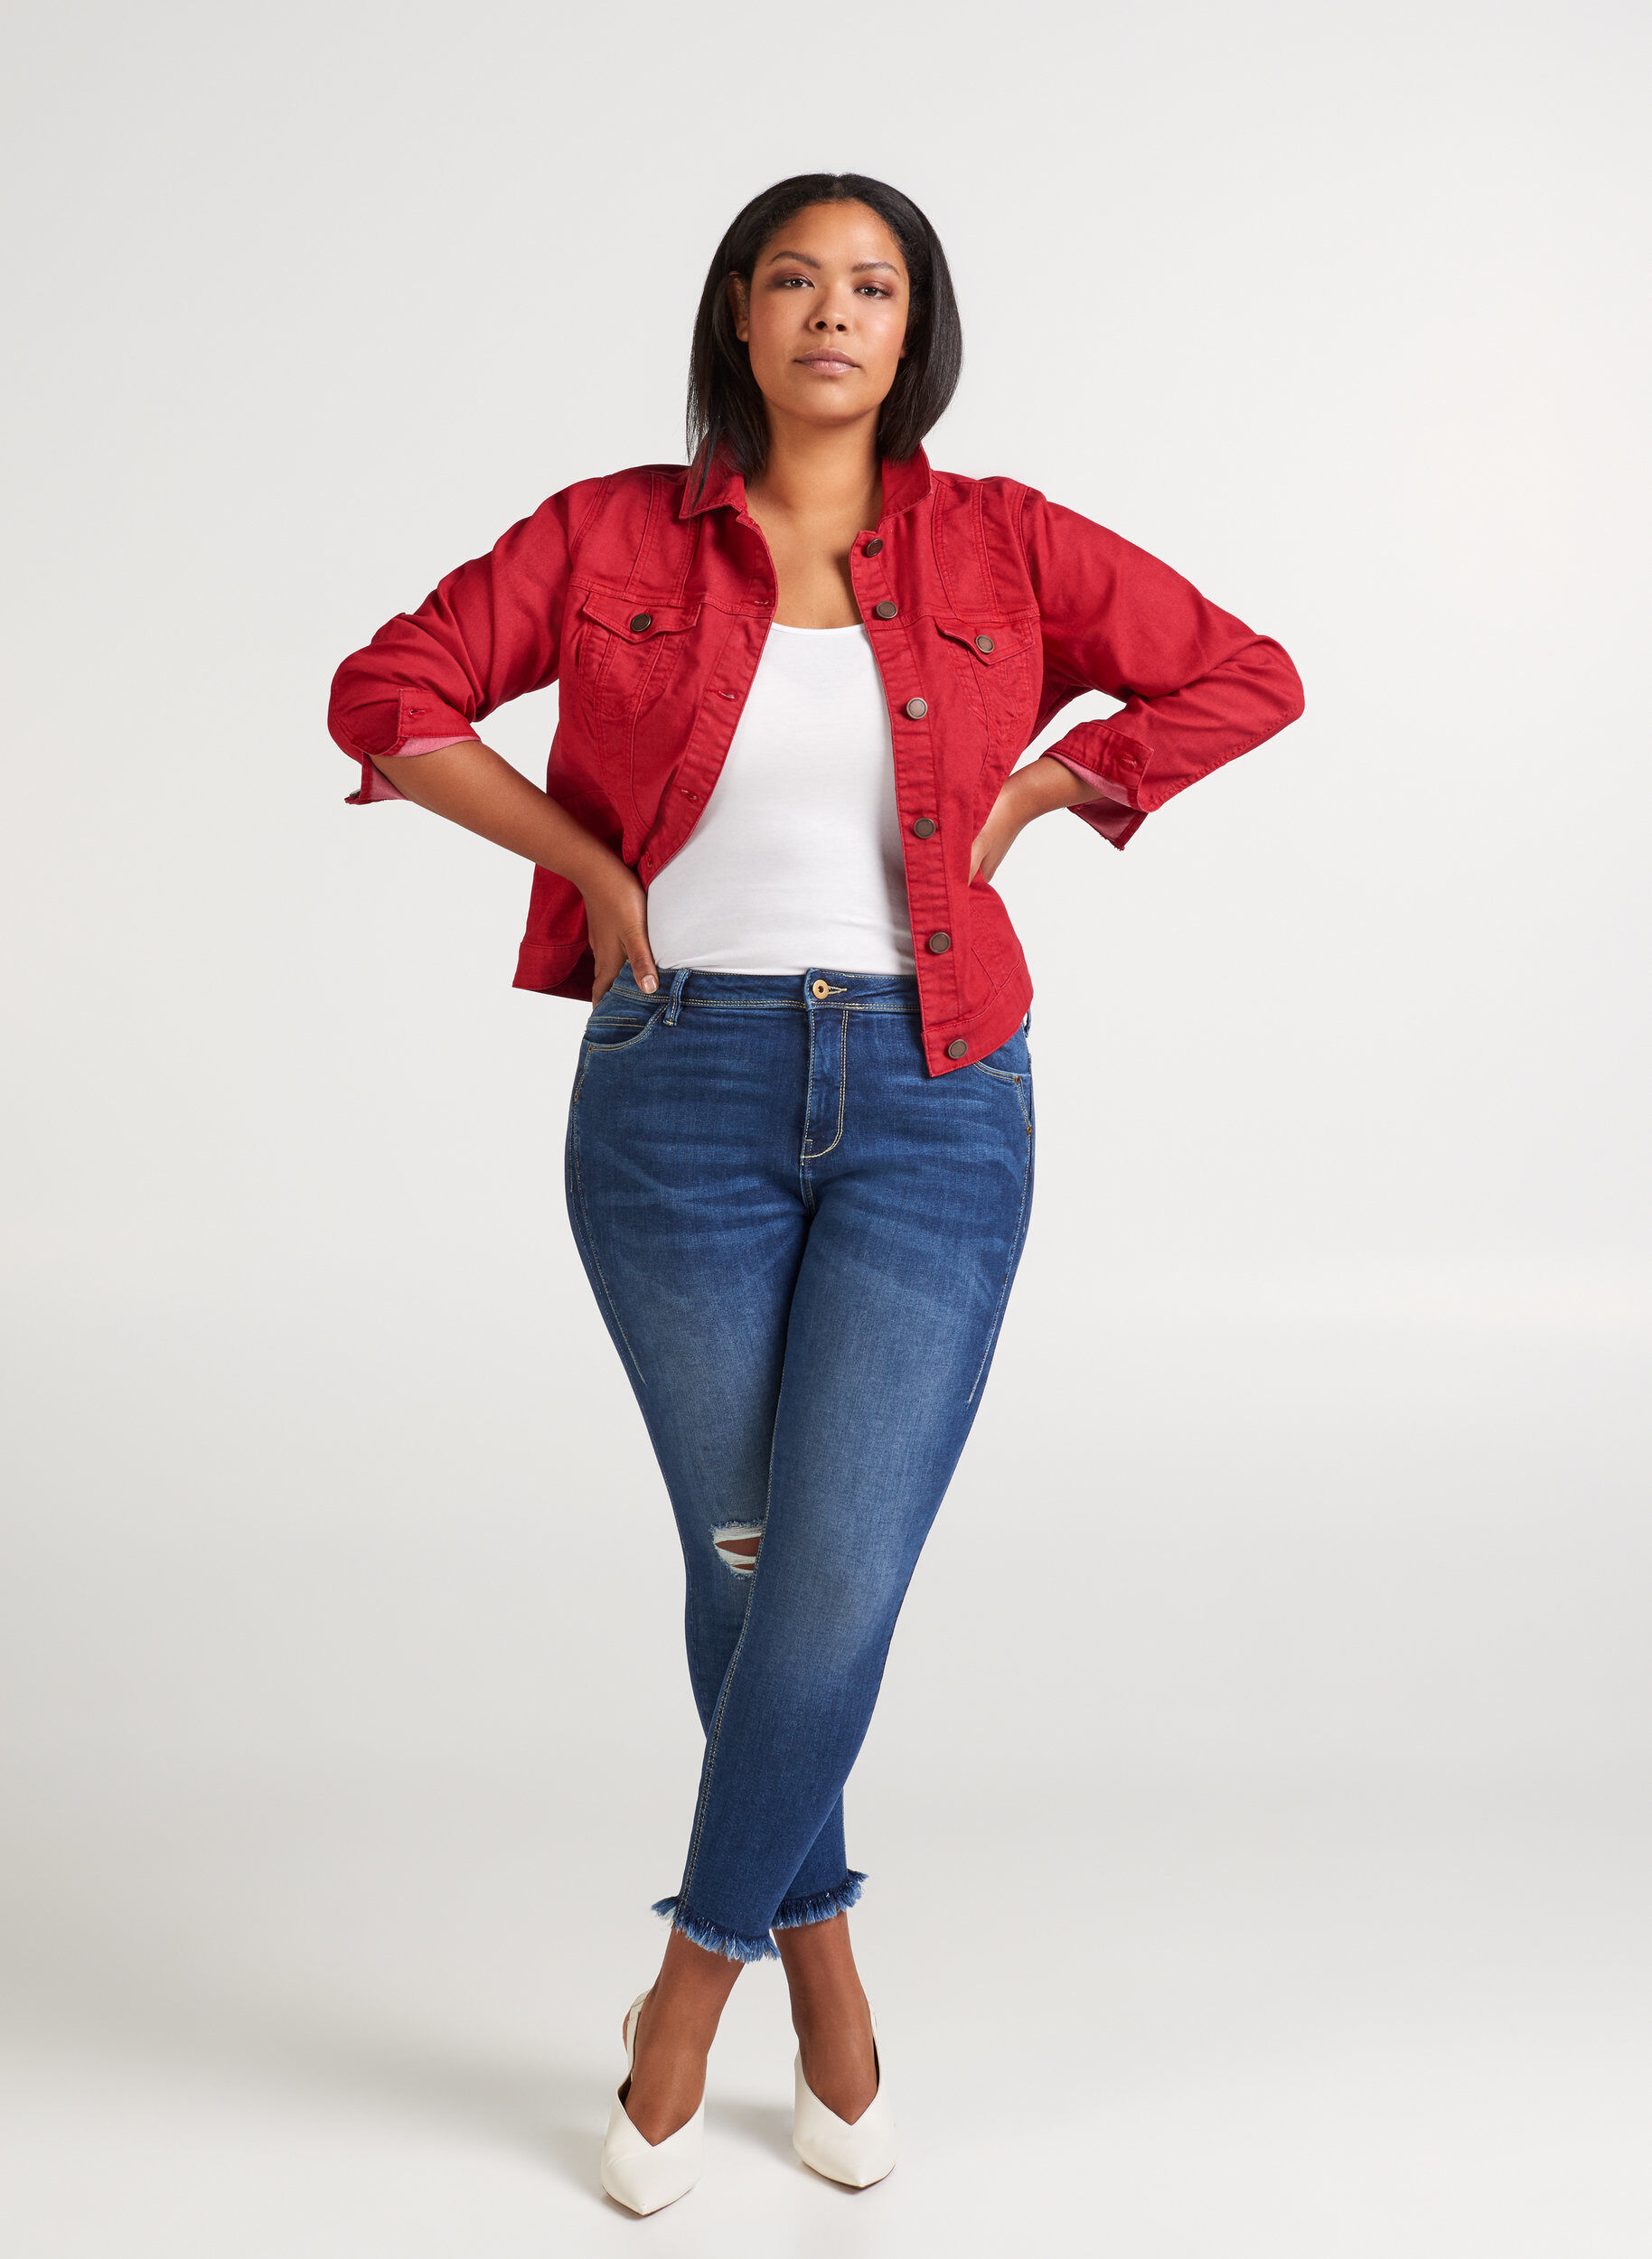 The Best Denim Jackets For Spring 2023 | Style by Savina